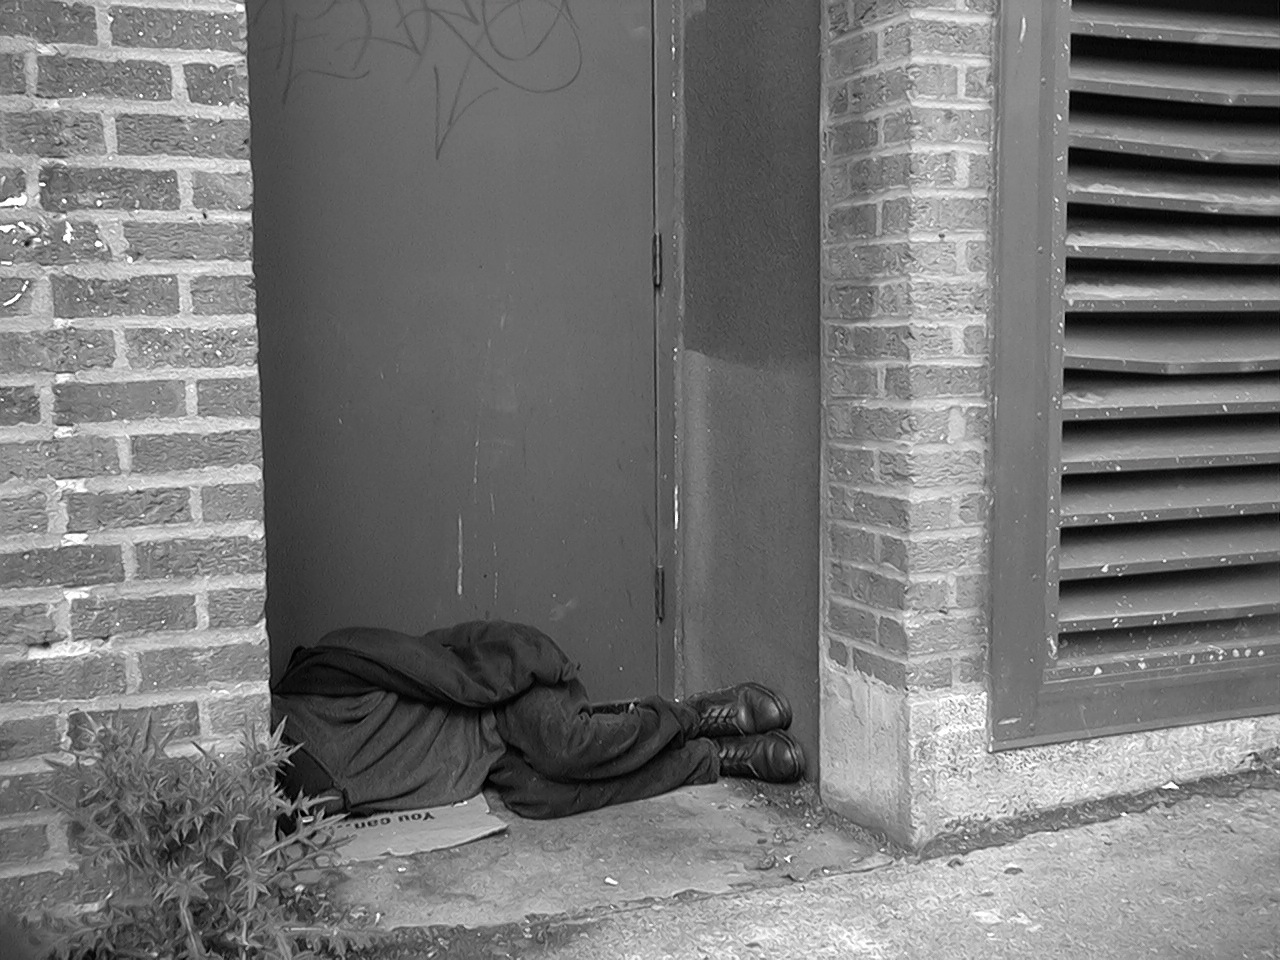 homeless man in alley